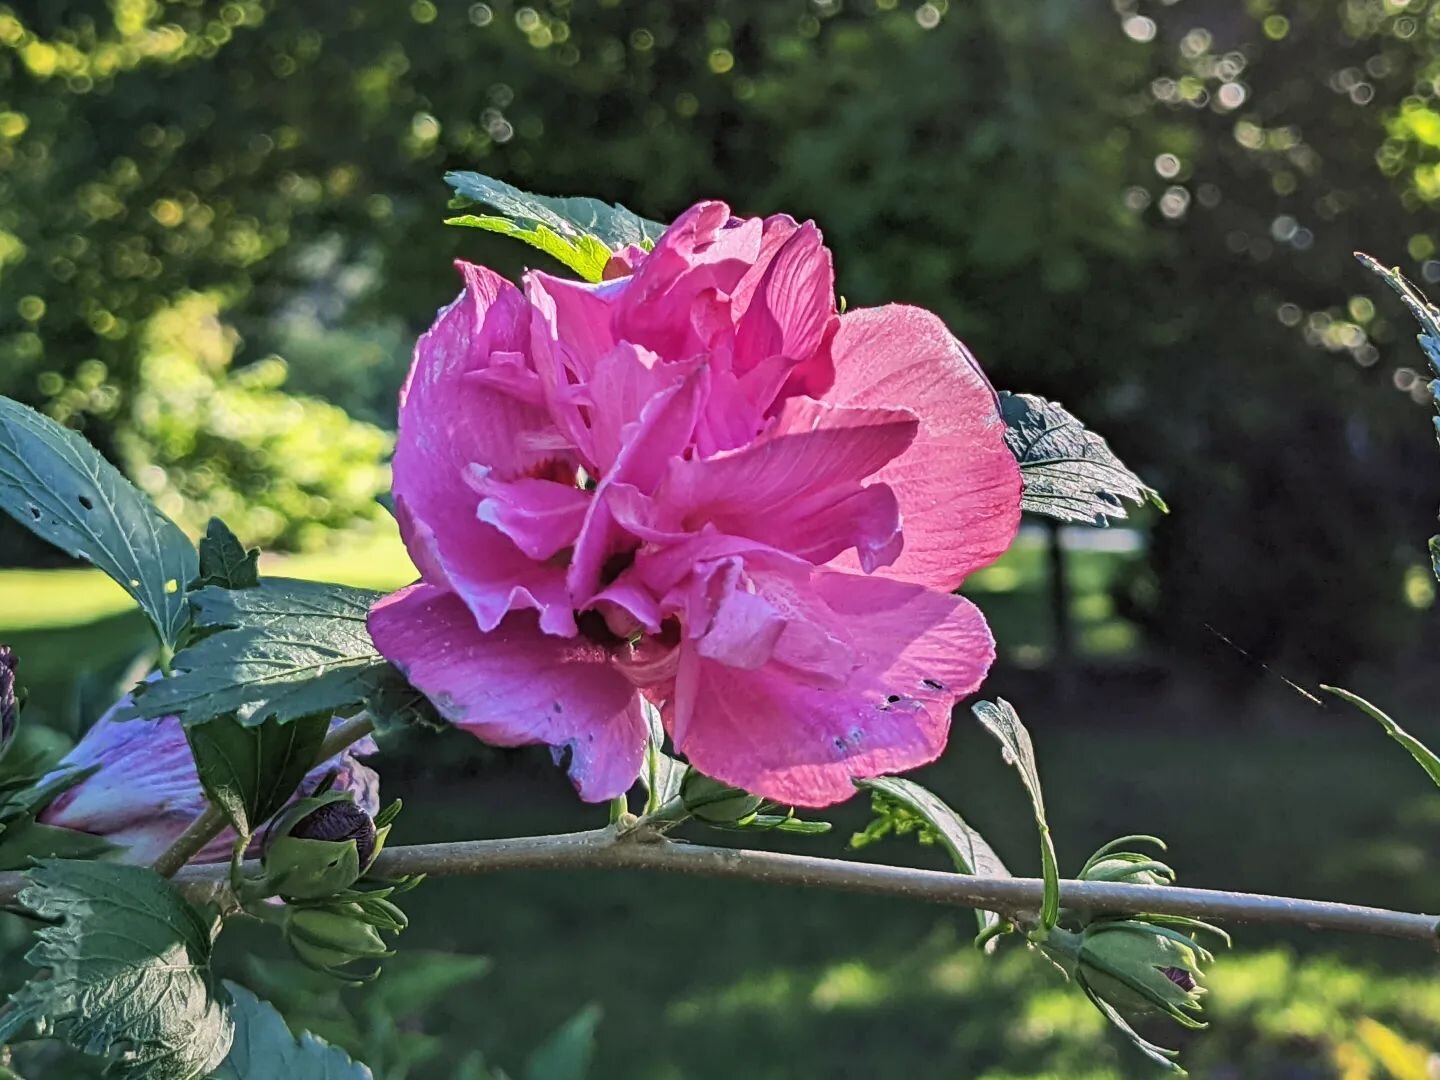 Not nearly as many blooms as last year (because of the neighboring redbud's growth - we have so many trees!) but I'm still enjoying the pops of pink on the Rose of Sharon.

Last year I learned that it's a hibiscus, distinguished from the perennial (o